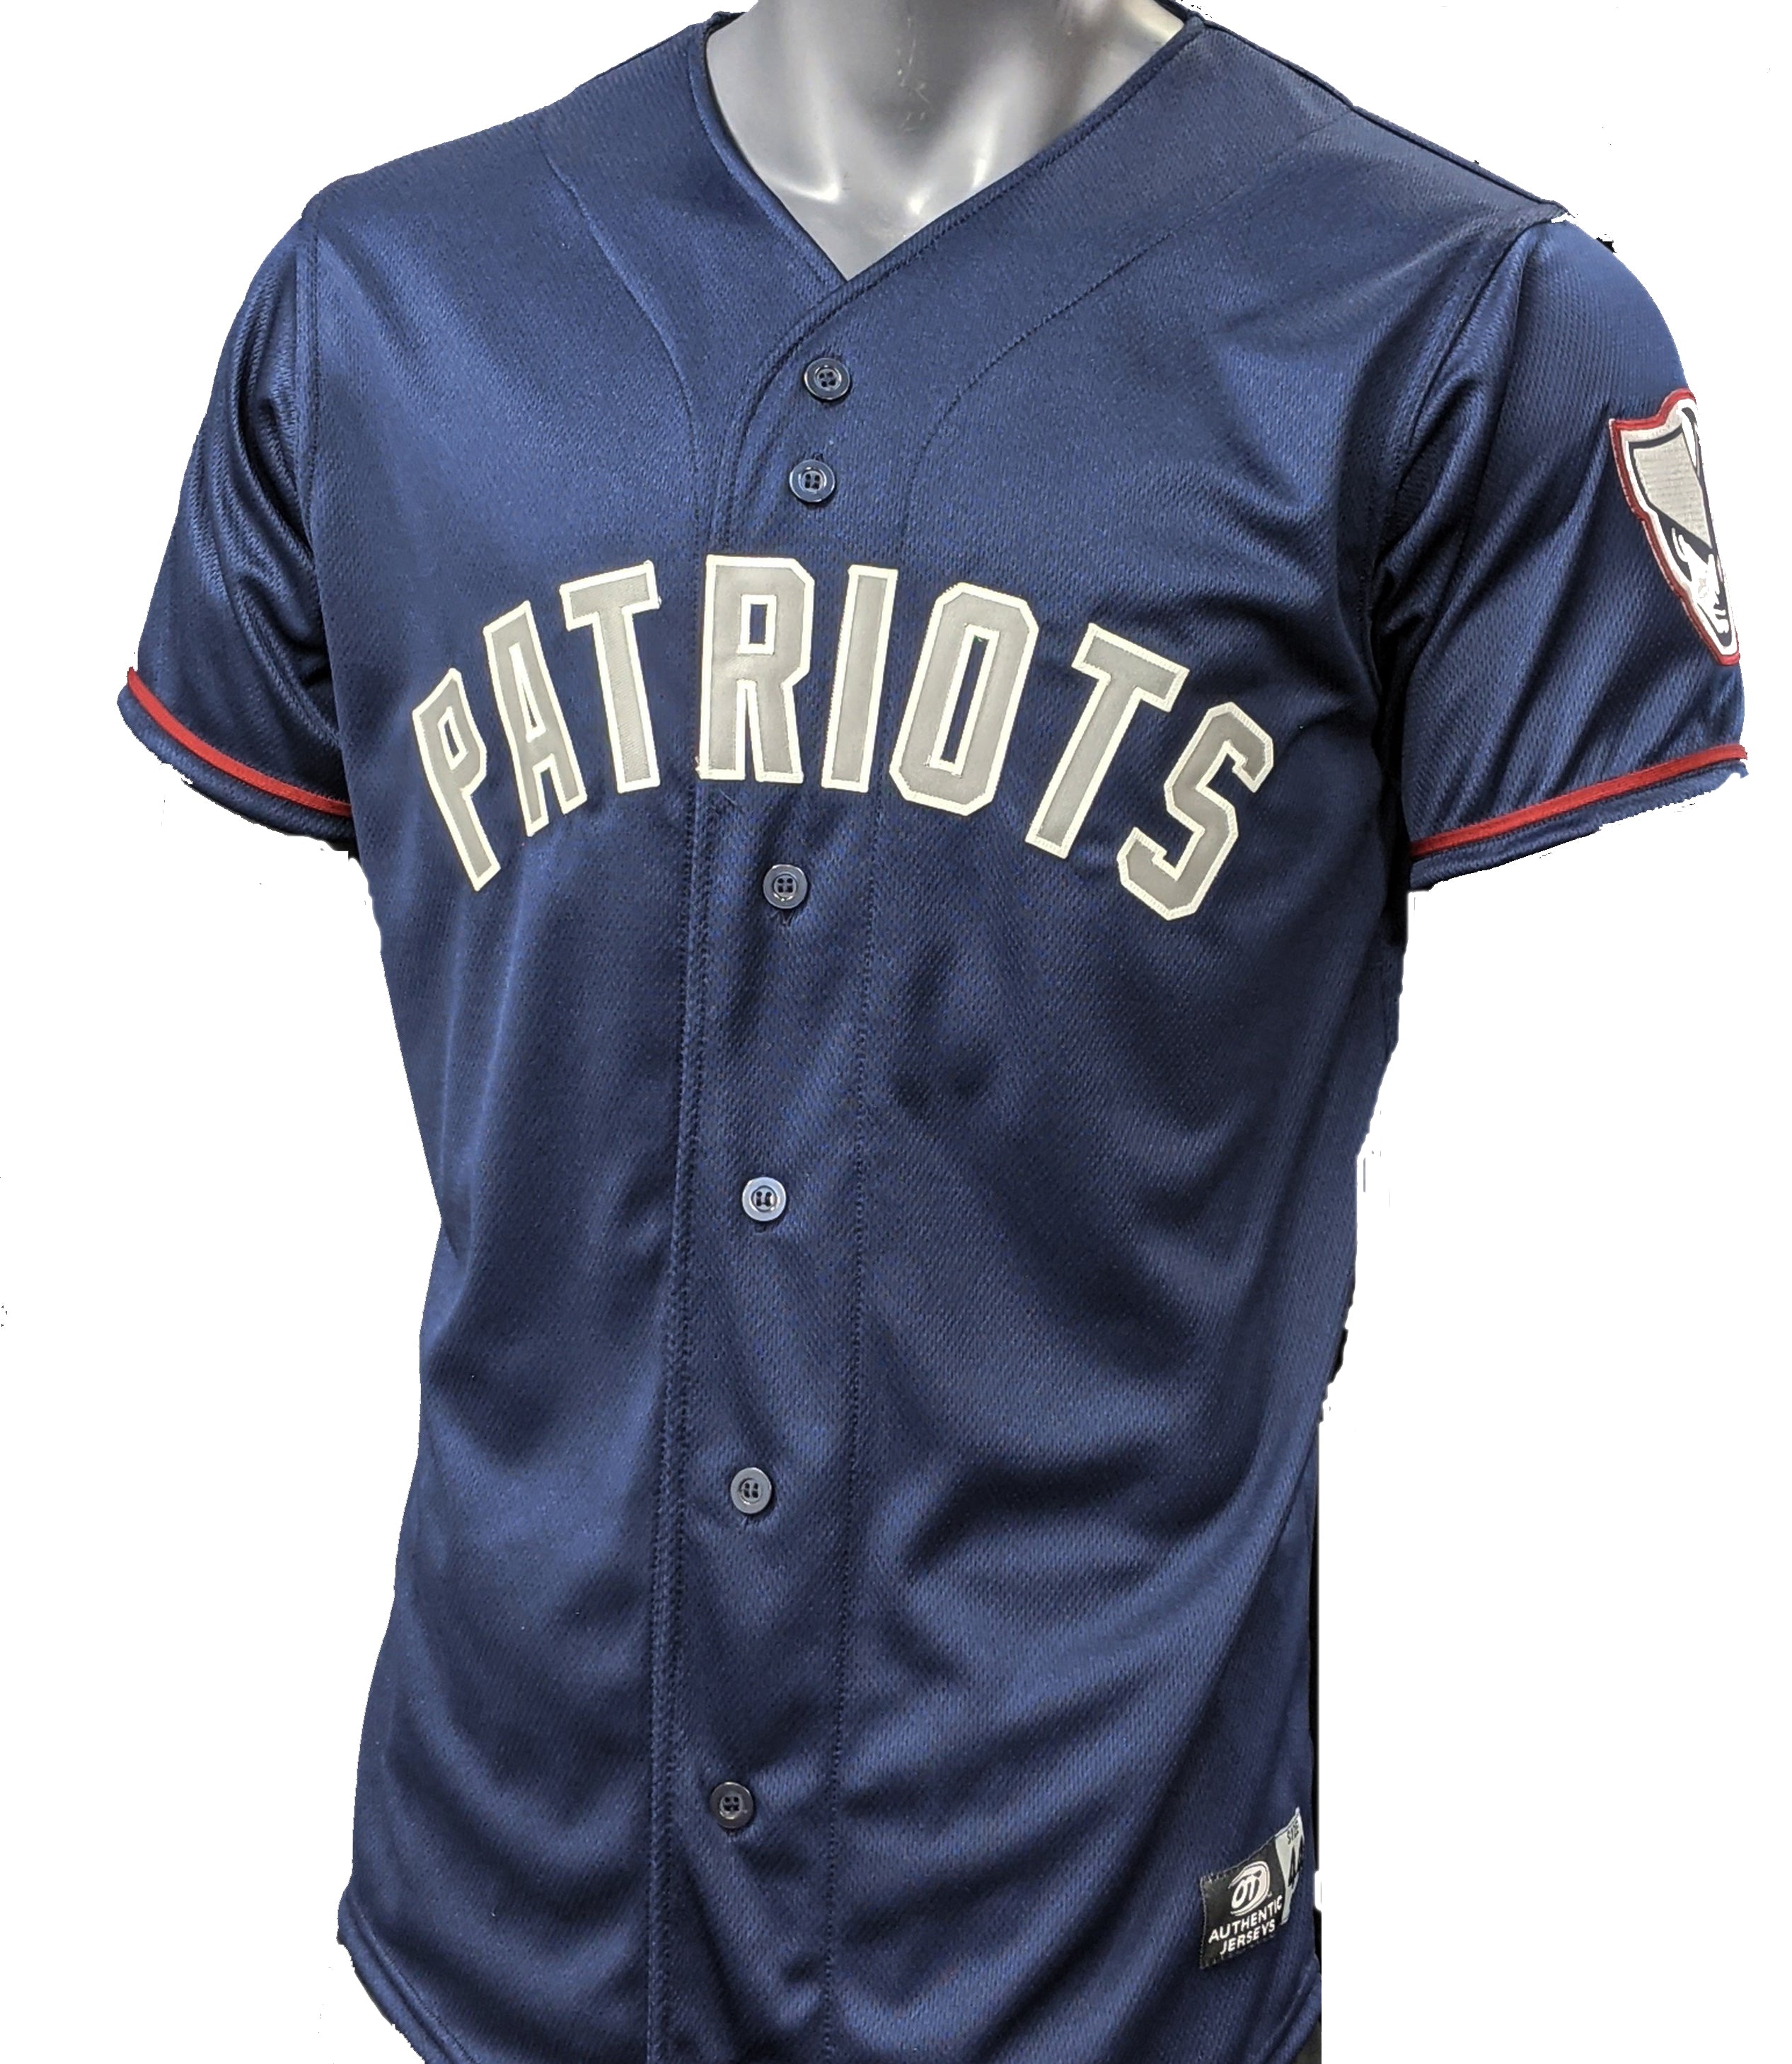 Yes, the New York Yankees should have alternate uniforms